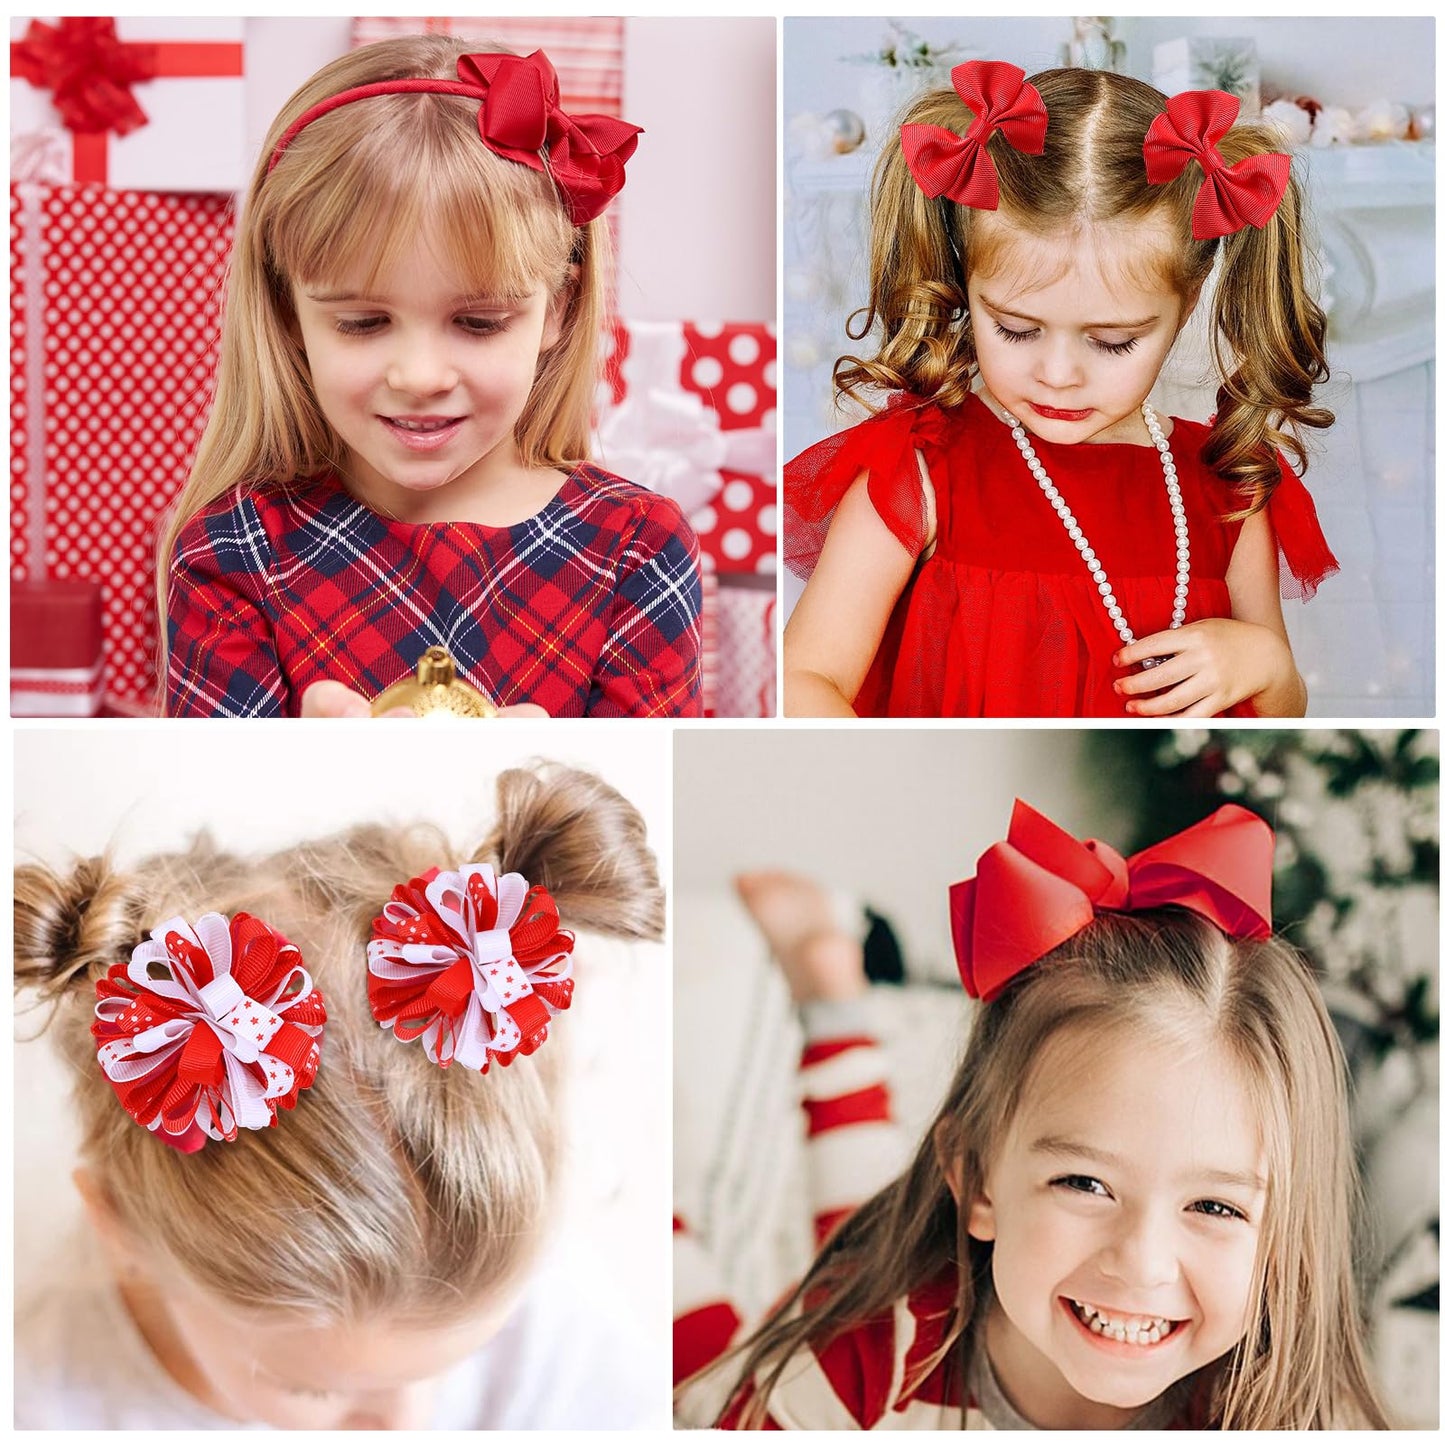 CN 20PCS Red Hair Bows for Girls, Bow Hair Clips Headband Hair Ties Hair Barrettes Ponytail Holders Curly Koker Bows Hair Accessories School Uniform Set for Little Girls Teens Toddler